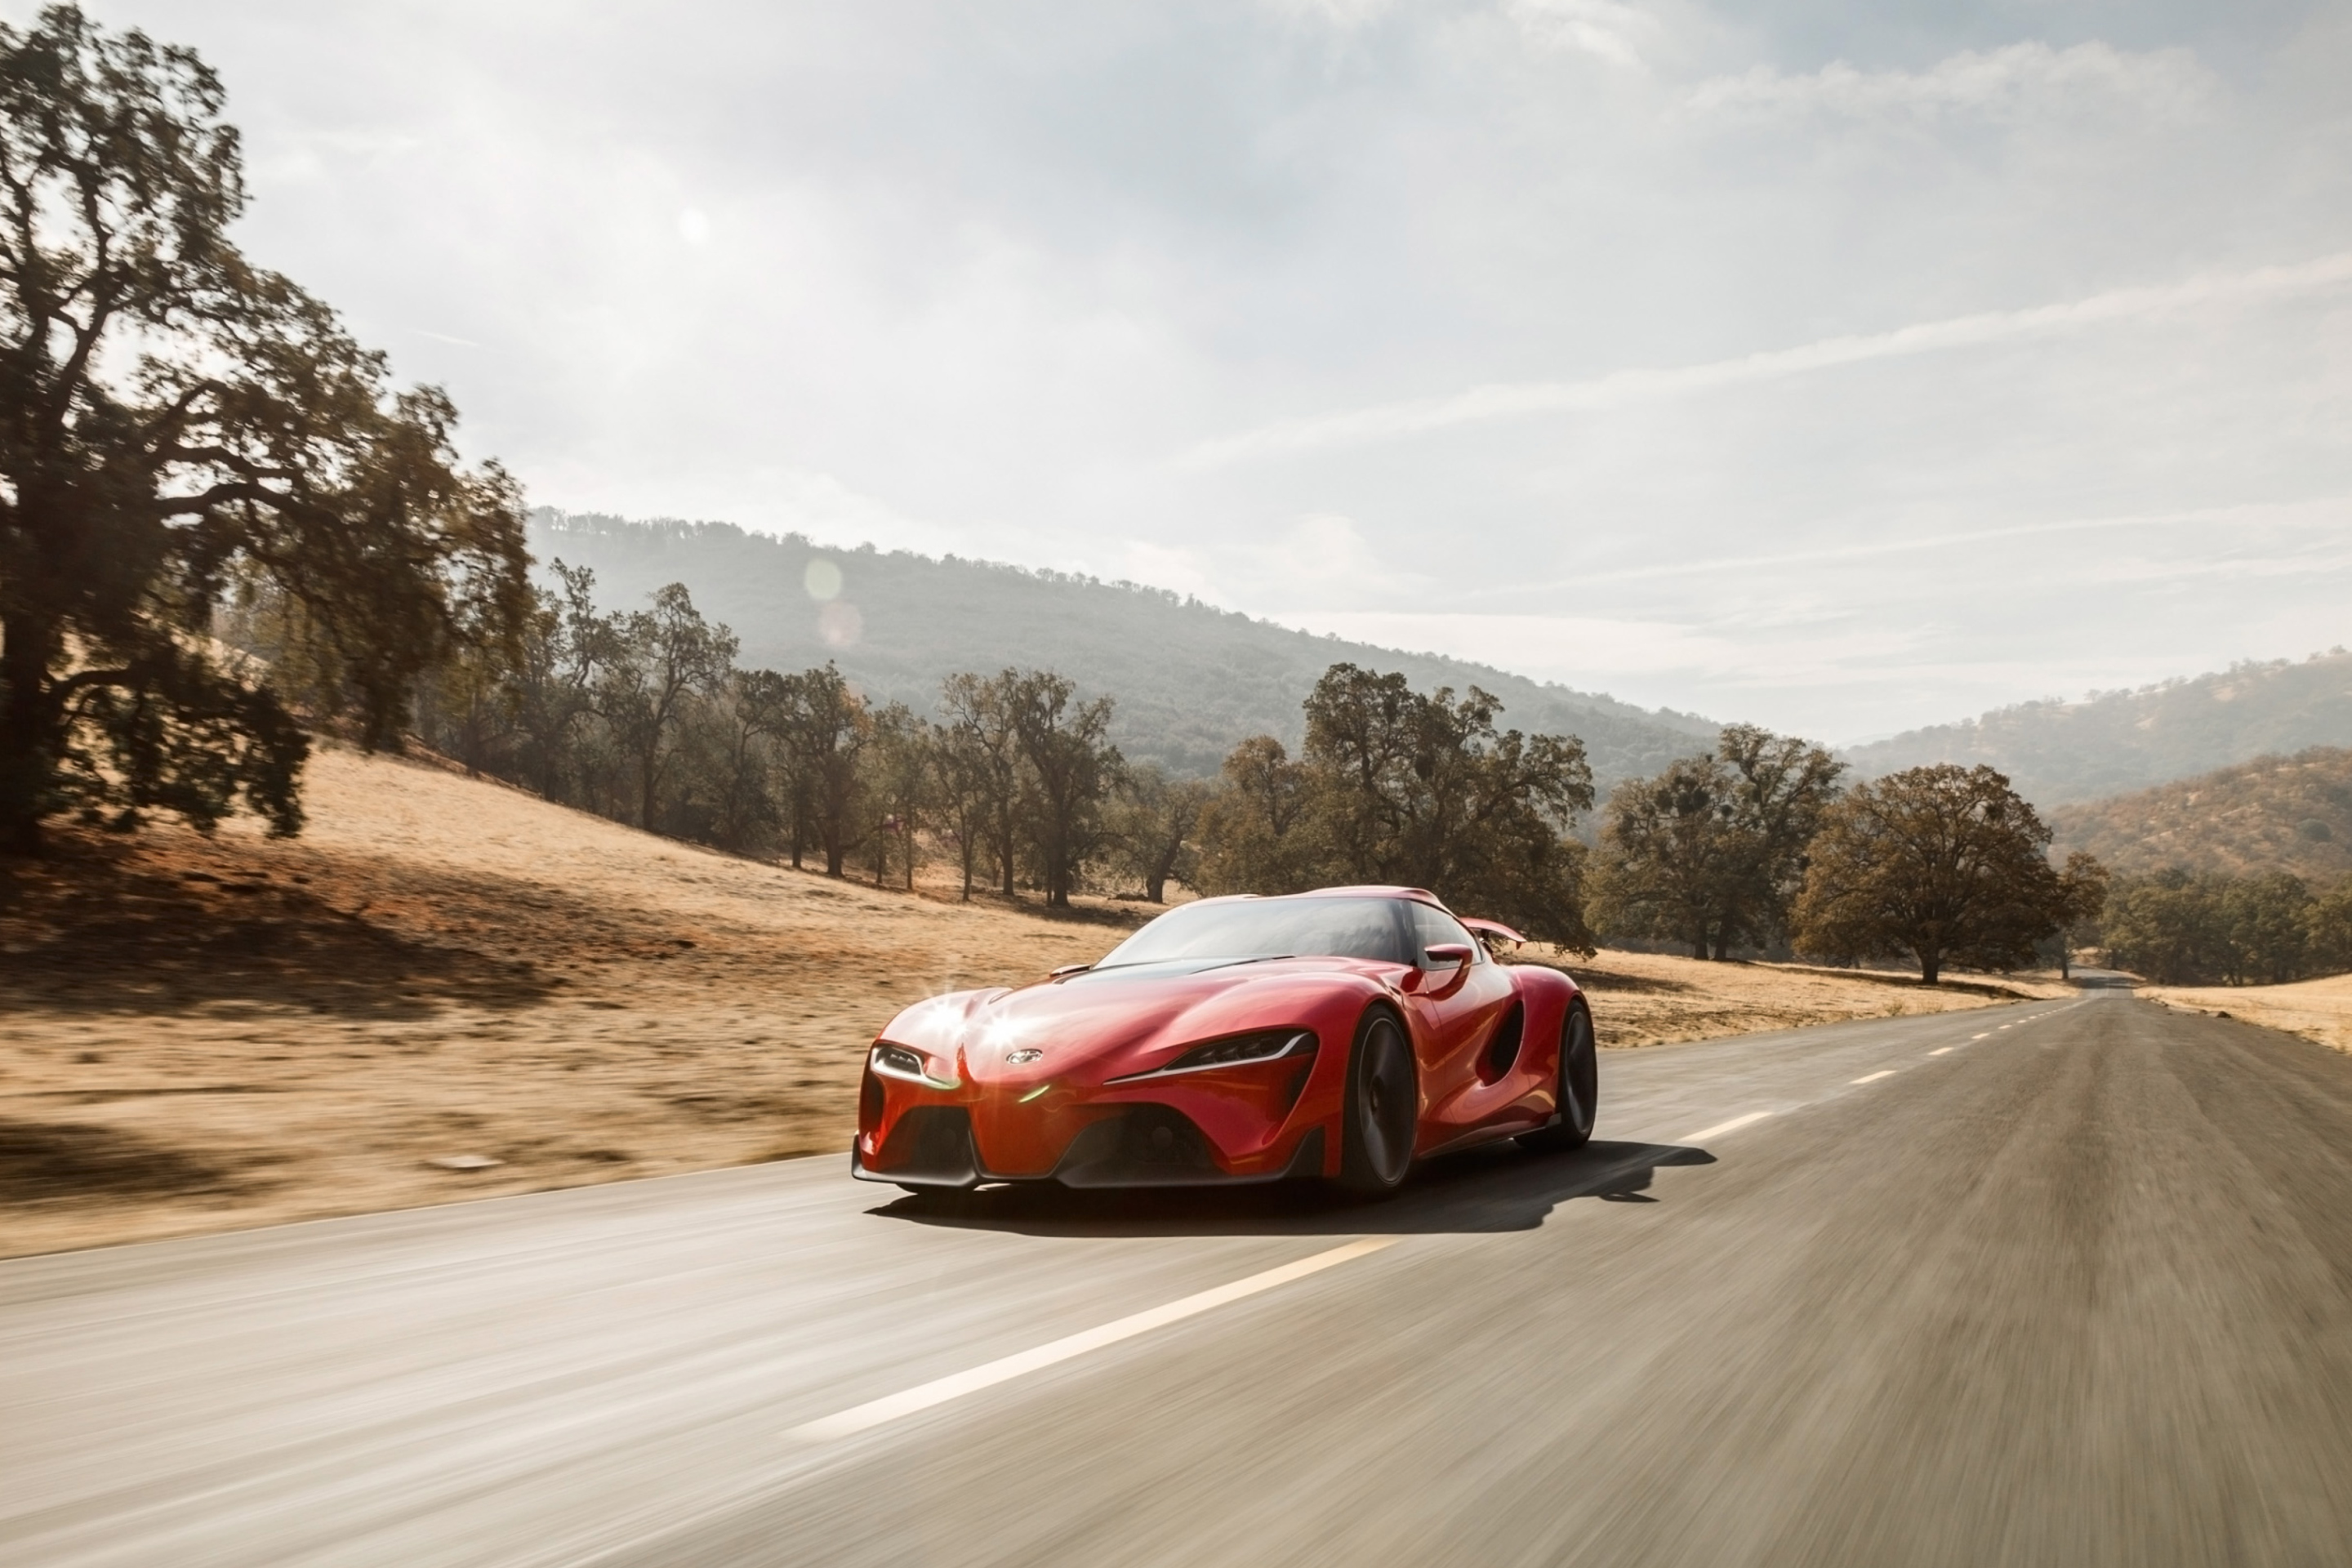 2014 Toyota Ft 1 Concept Front Angle screenshot #1 2880x1920